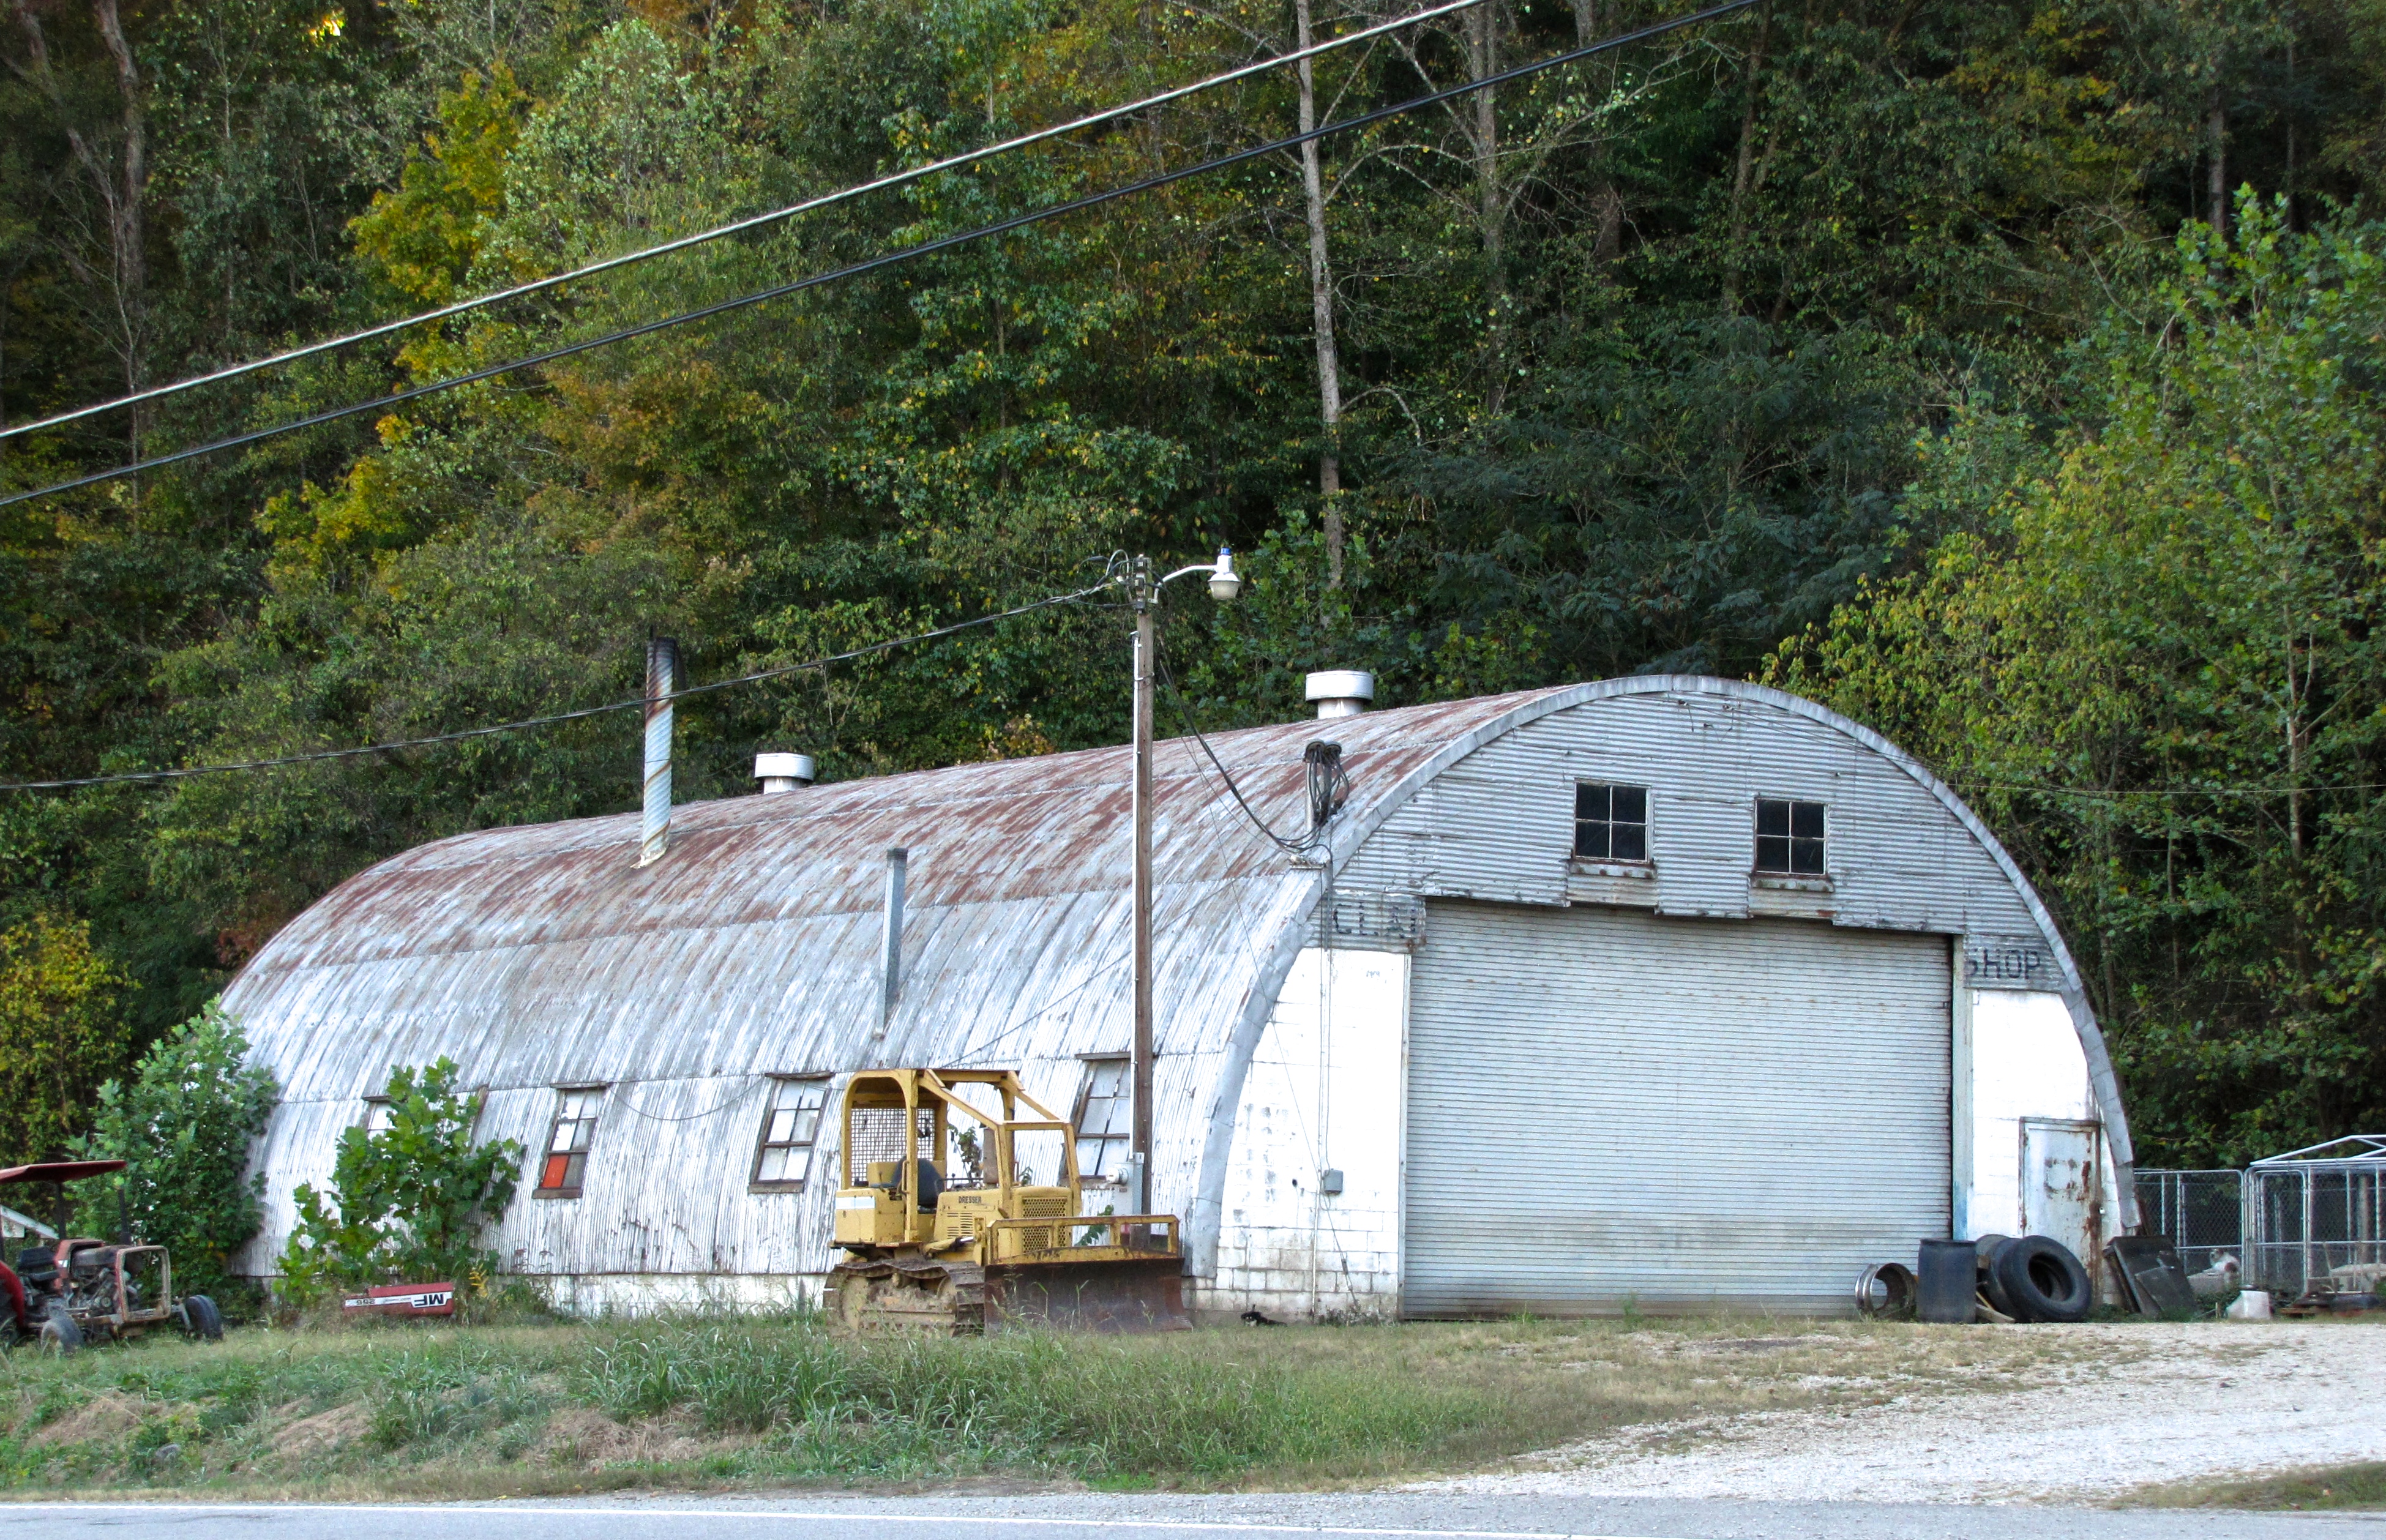 quonset hut in Jersey City, NJ